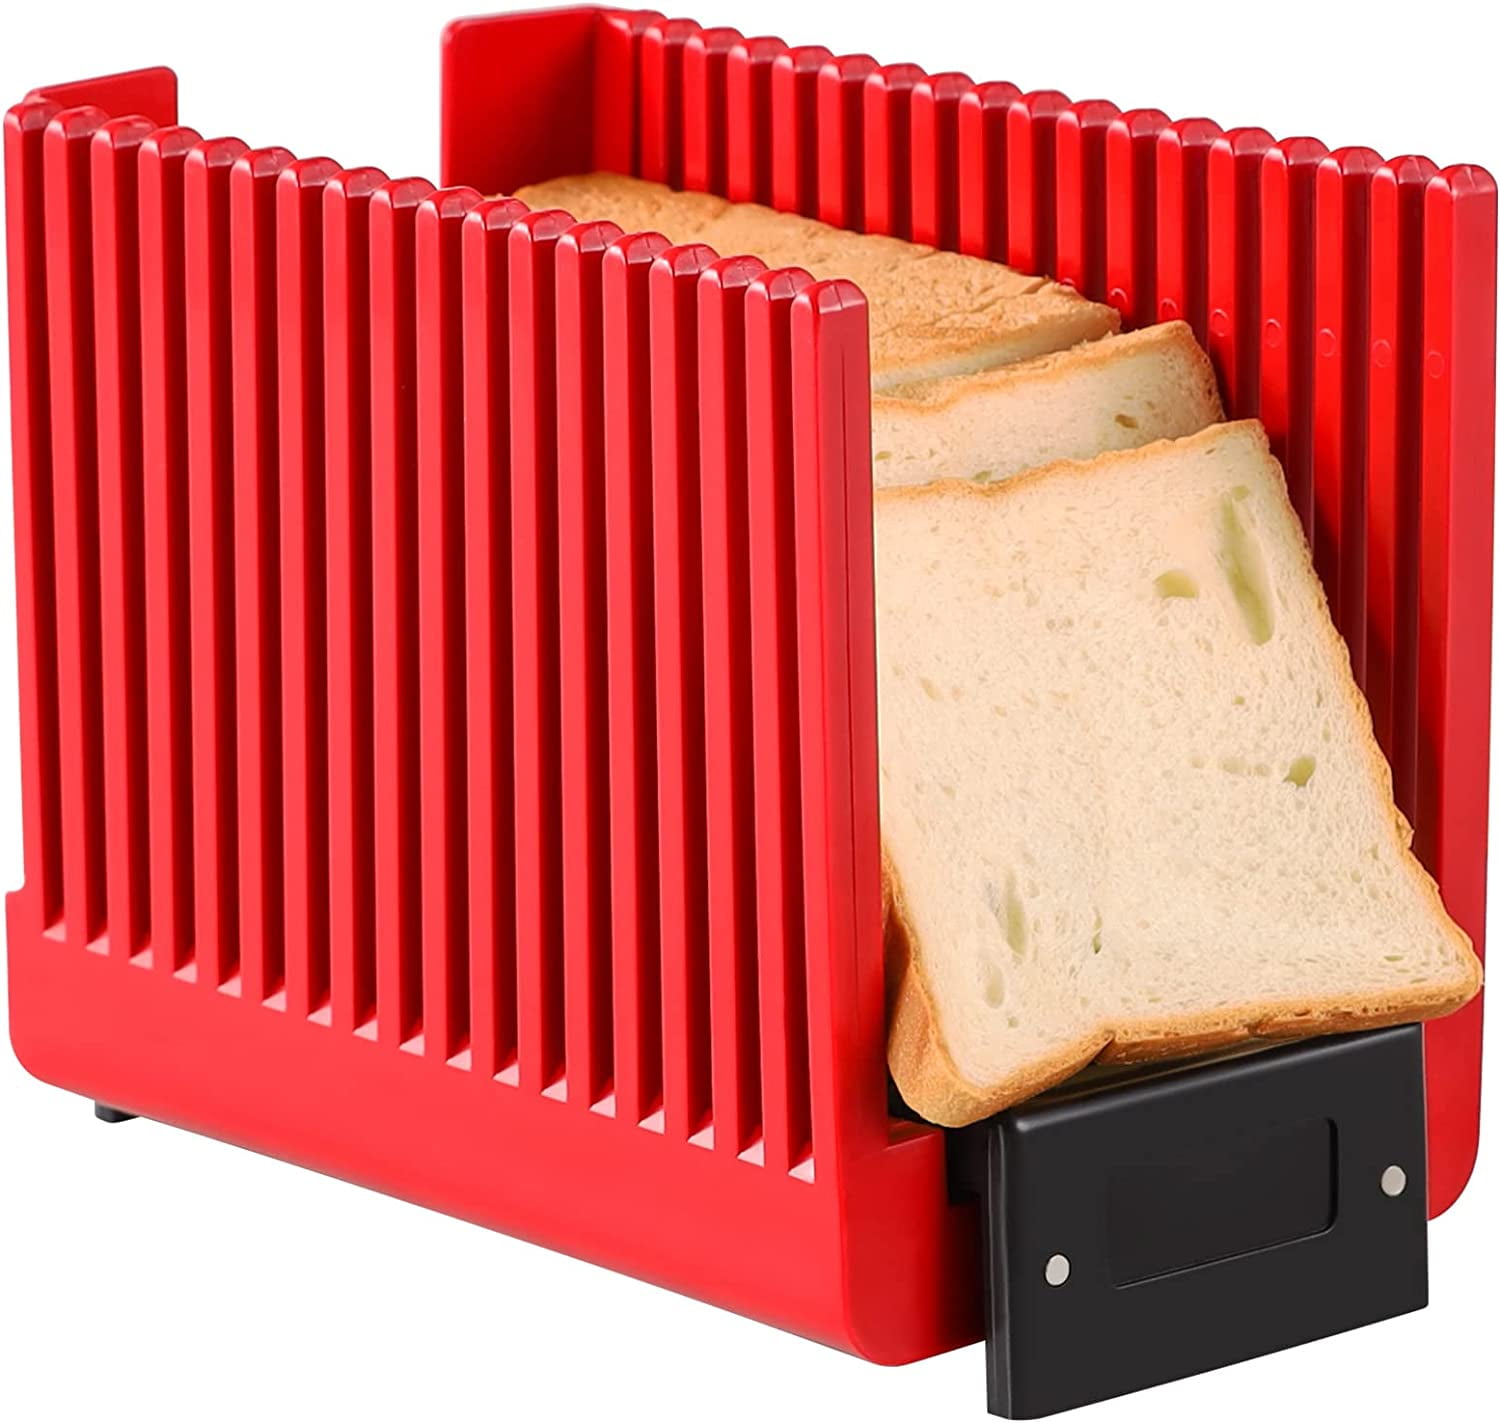 Your Guide to Buying an Industrial Bread Slicing Machine